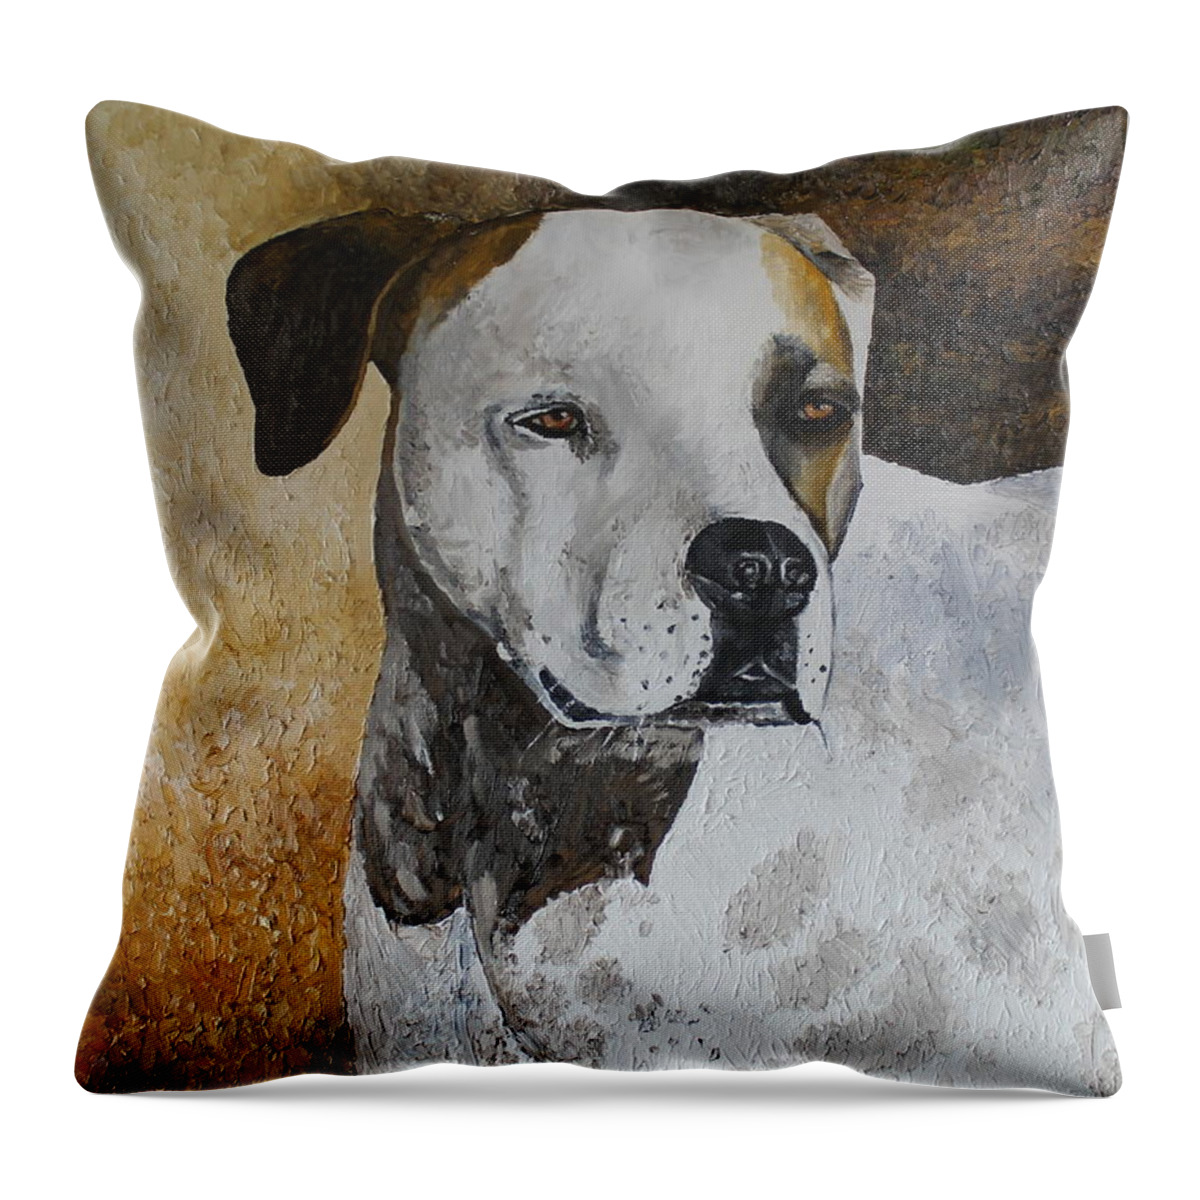 Patch Throw Pillow featuring the painting Patch by Larry Whitler